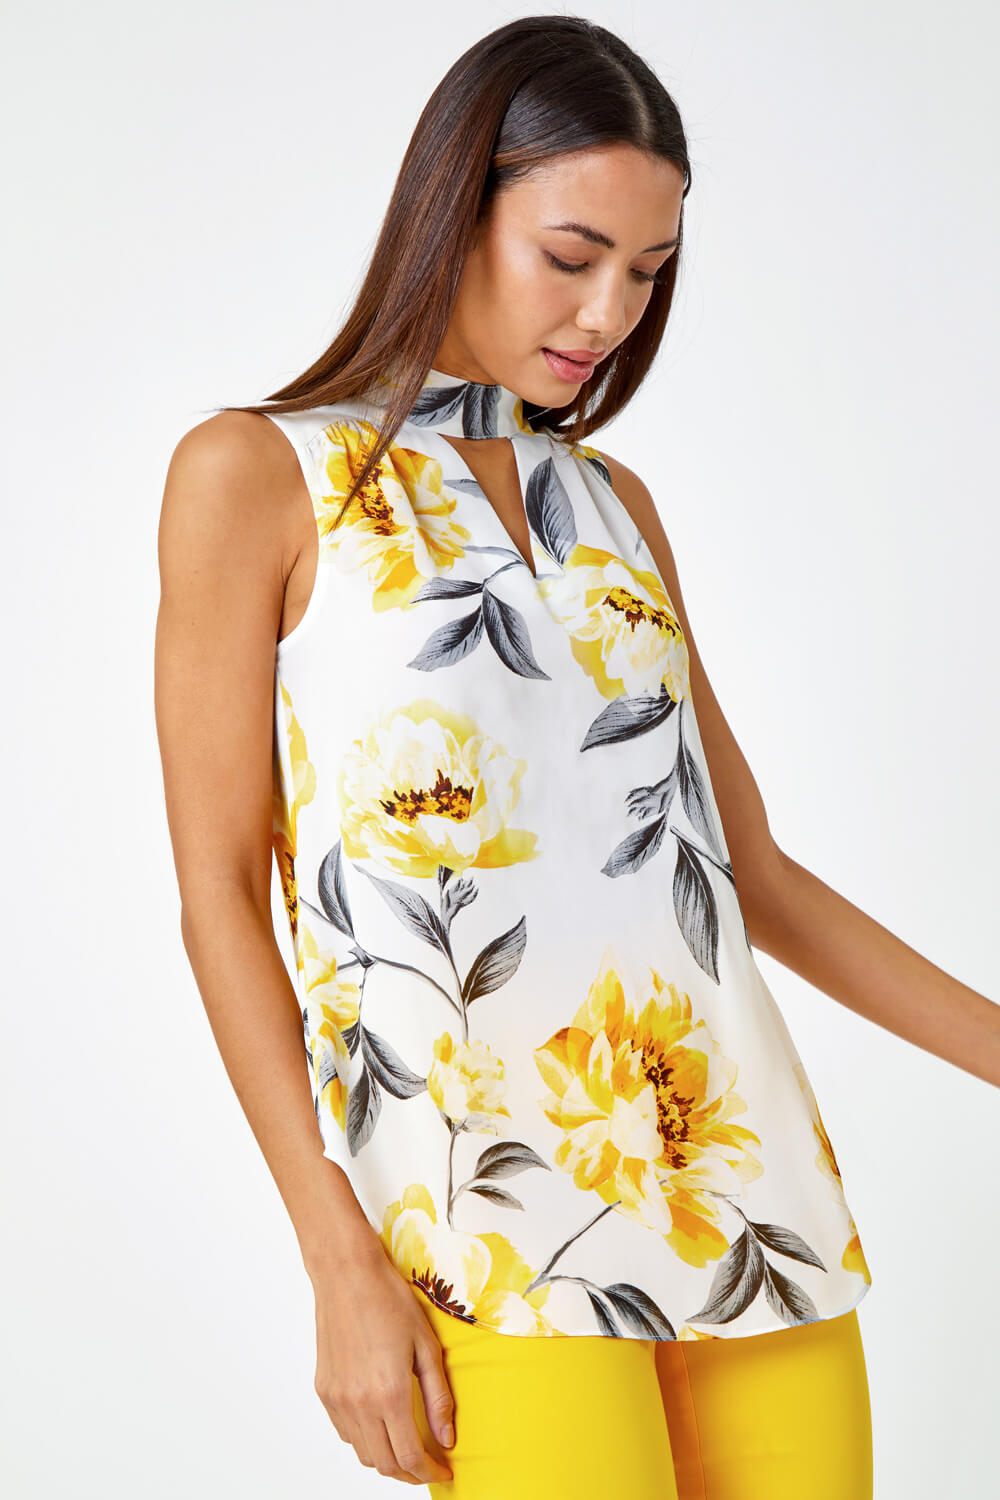 Yellow Floral Print High Neck Sleeveless Top, Image 2 of 5